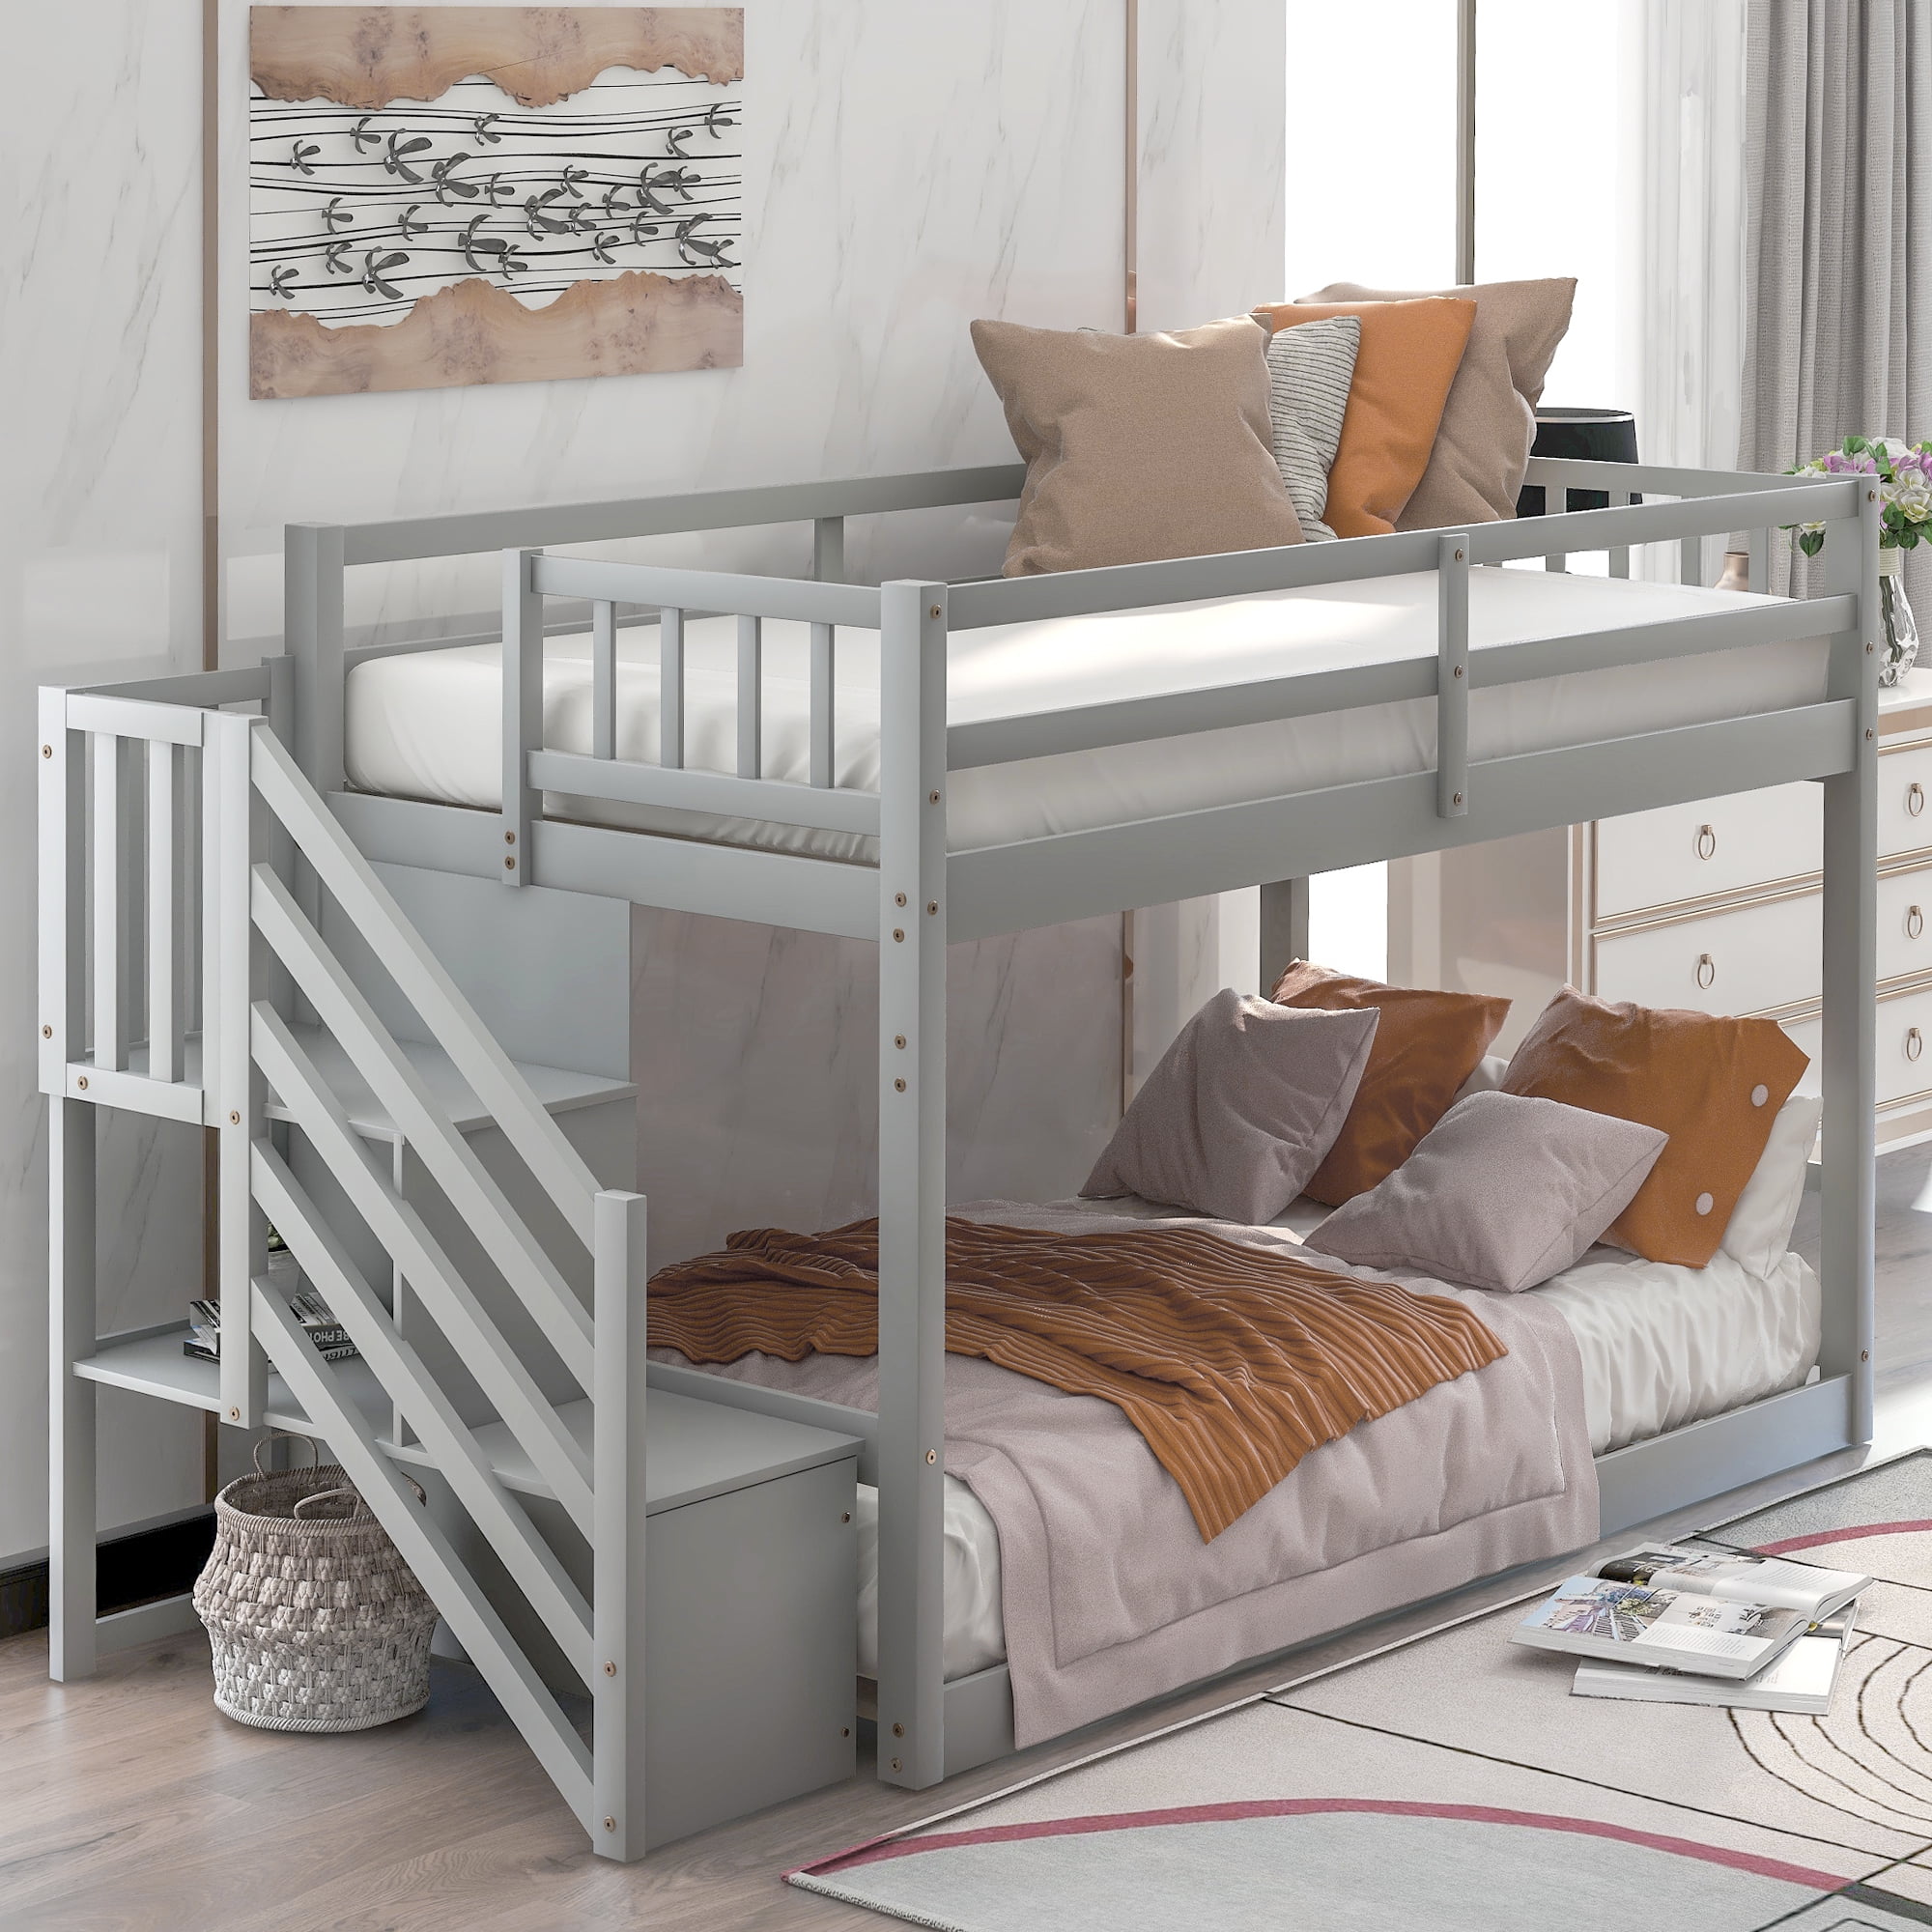 Low Bunk Bed With Stairs And Storage, Do Bunk Beds Need Box Springs